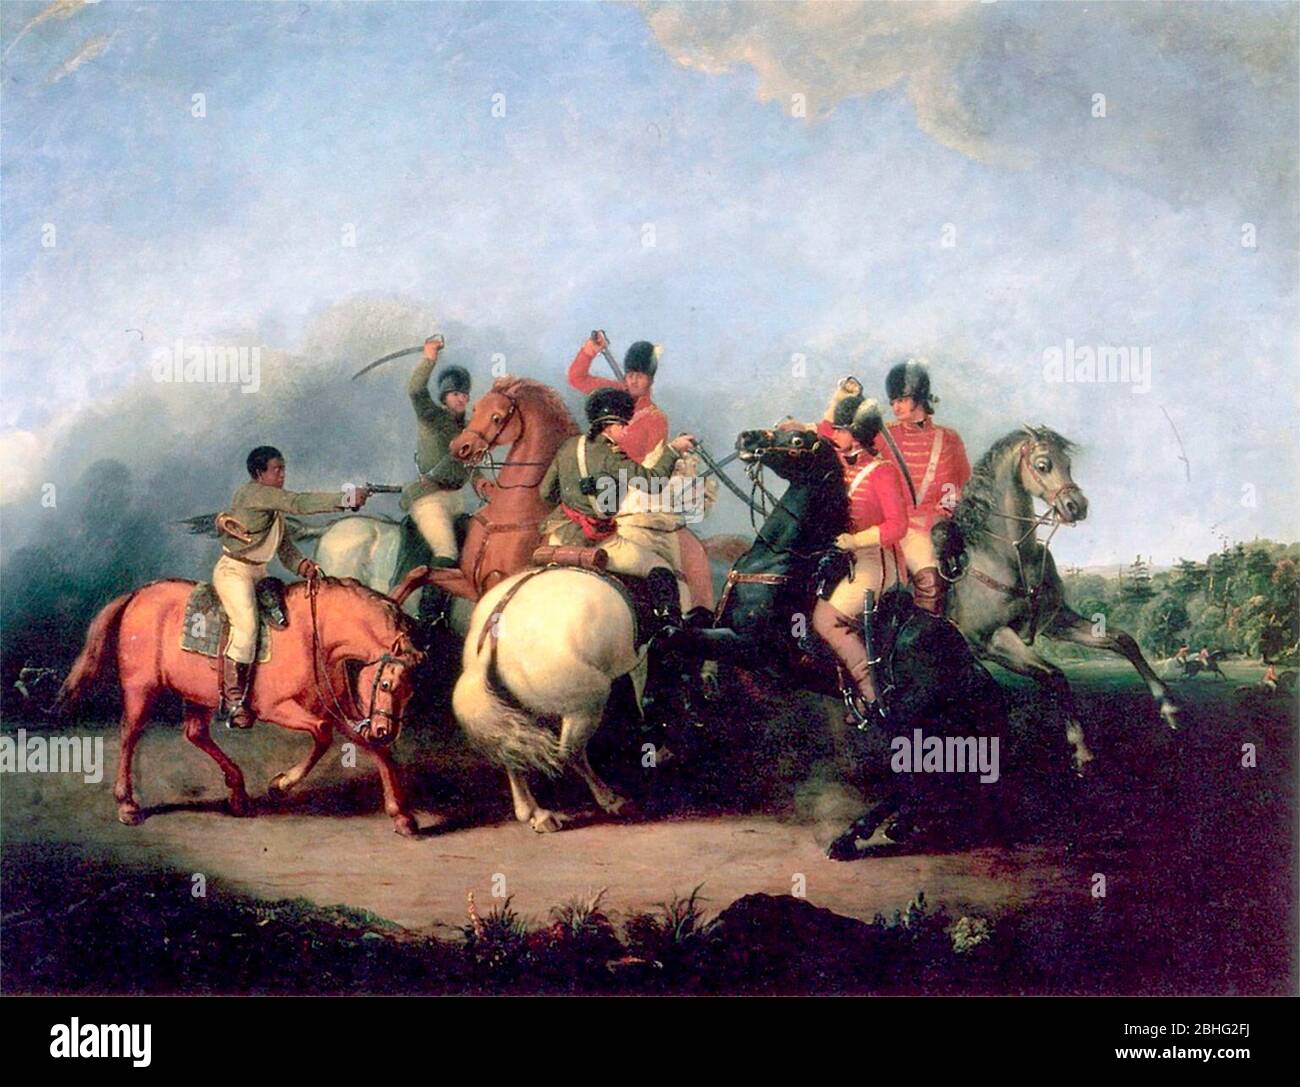 The Battle of Cowpens, painted by William Ranney in 1845. The scene depicts an unnamed black soldier (left) firing his pistol and saving the life of Colonel William Washington Stock Photo